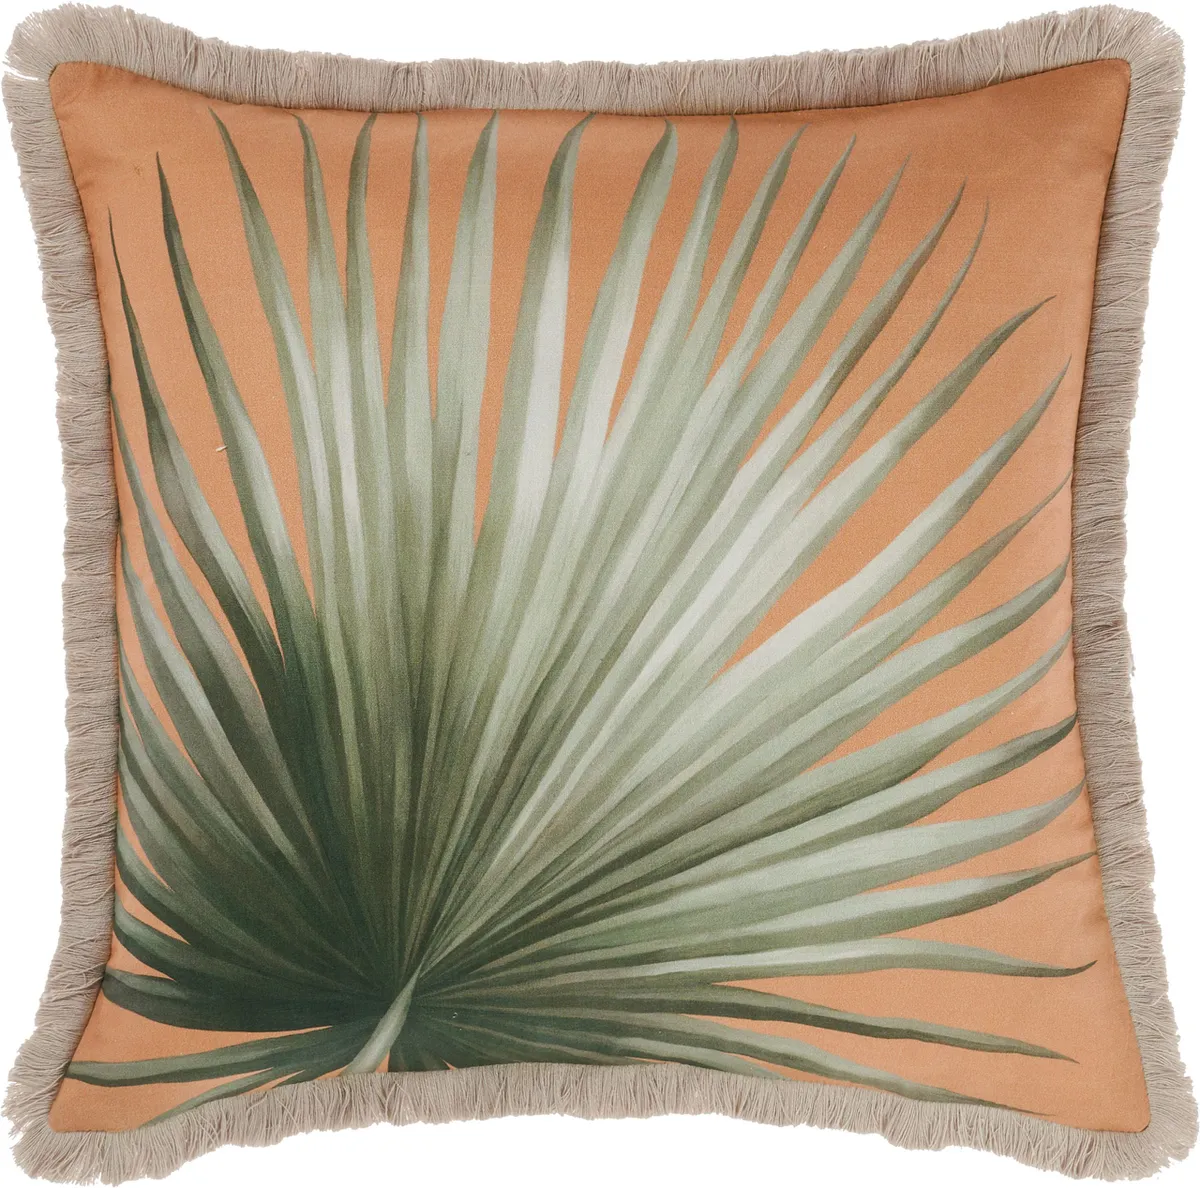 £38 from The French Bedroom Company Pile up cushions like this retro-glam tropical palm fringed design for a luxe feel.